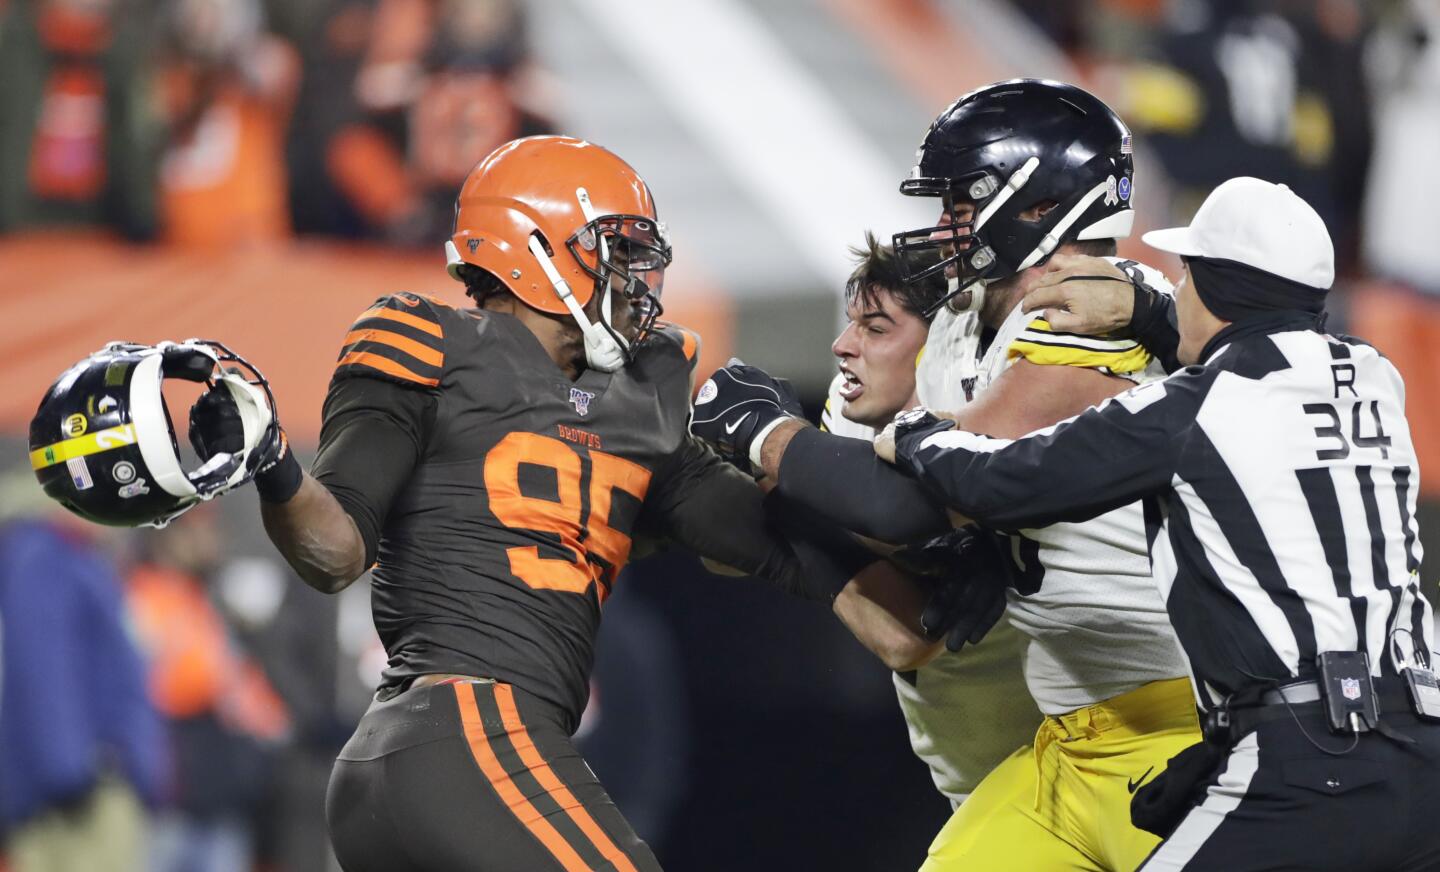 Photos: Pittsburgh Steelers' brawl with Cleveland Browns - Los